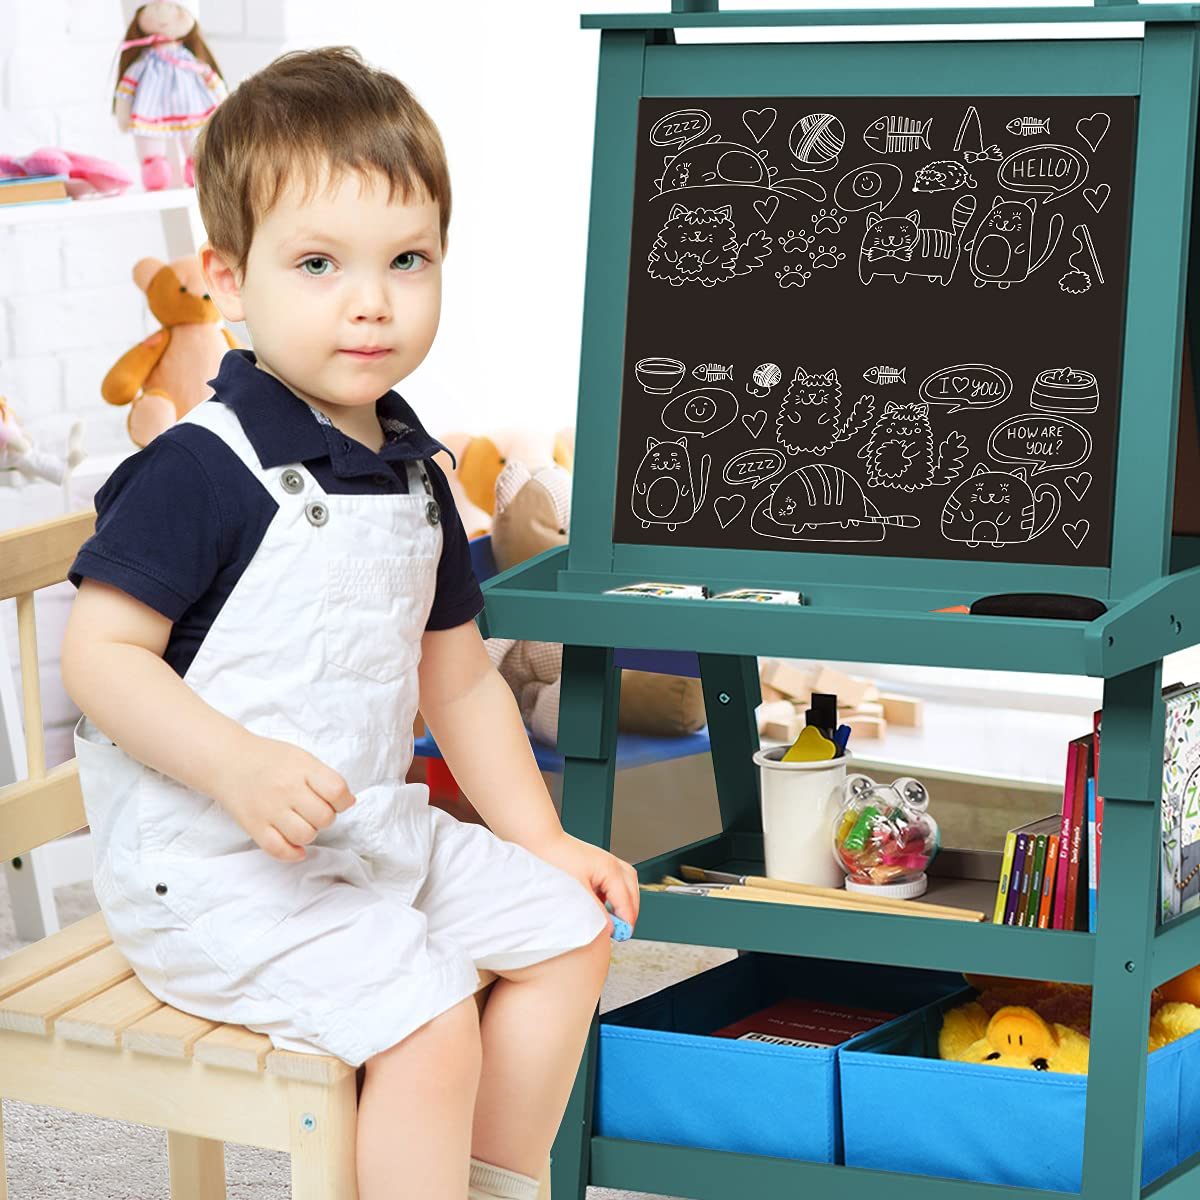 Costzon 3 in 1 Kids Art Easel with Paper Roll, Double Sided Adjustable –  costzon